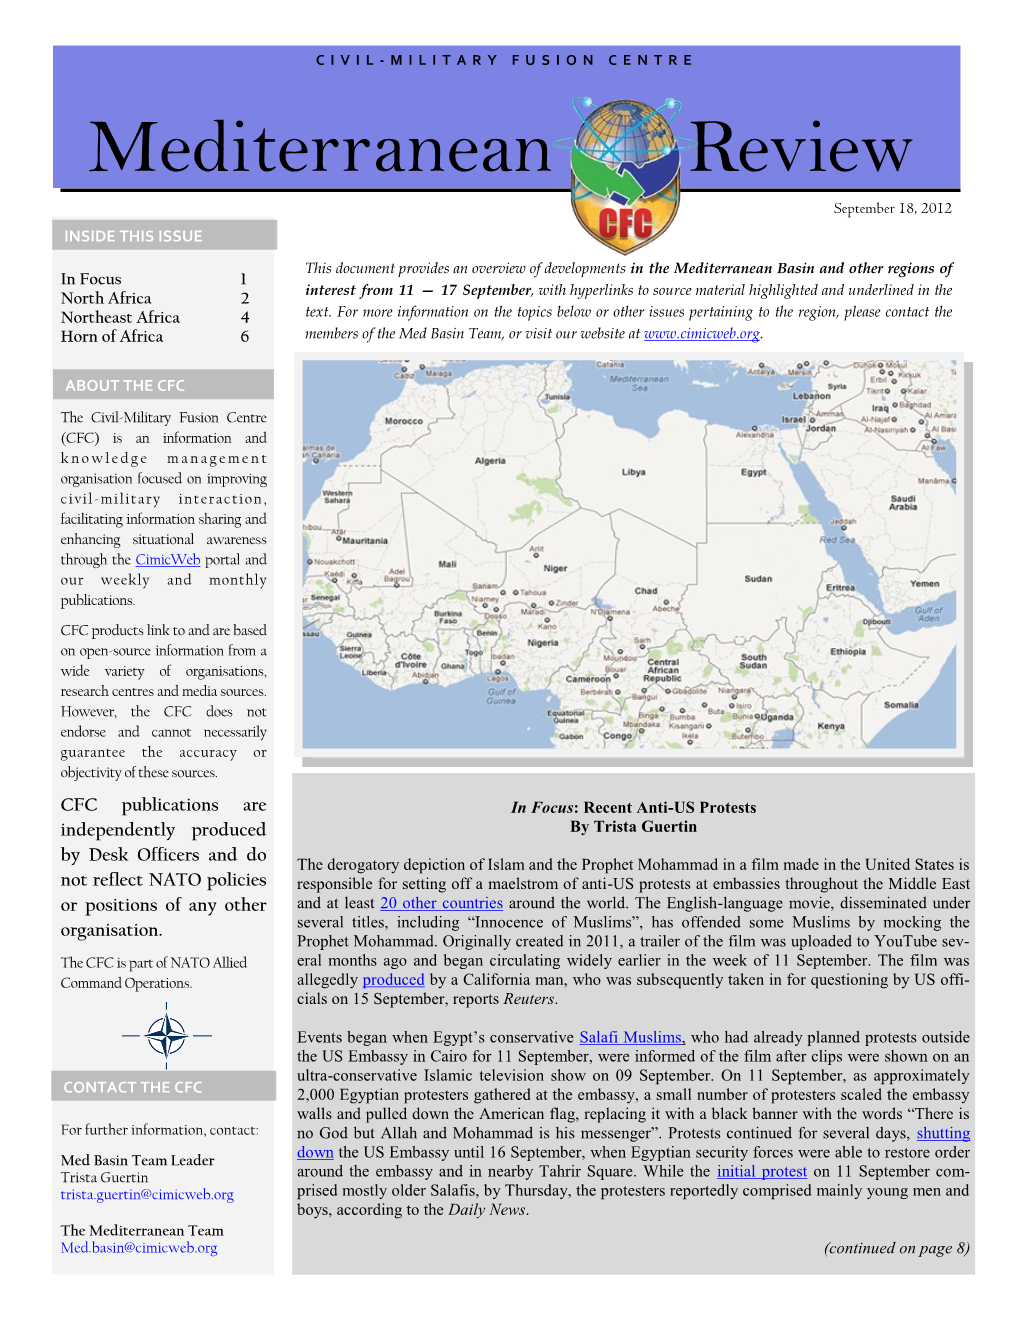 Mediterranean Review September 18, 2012 INSIDE THIS ISSUE